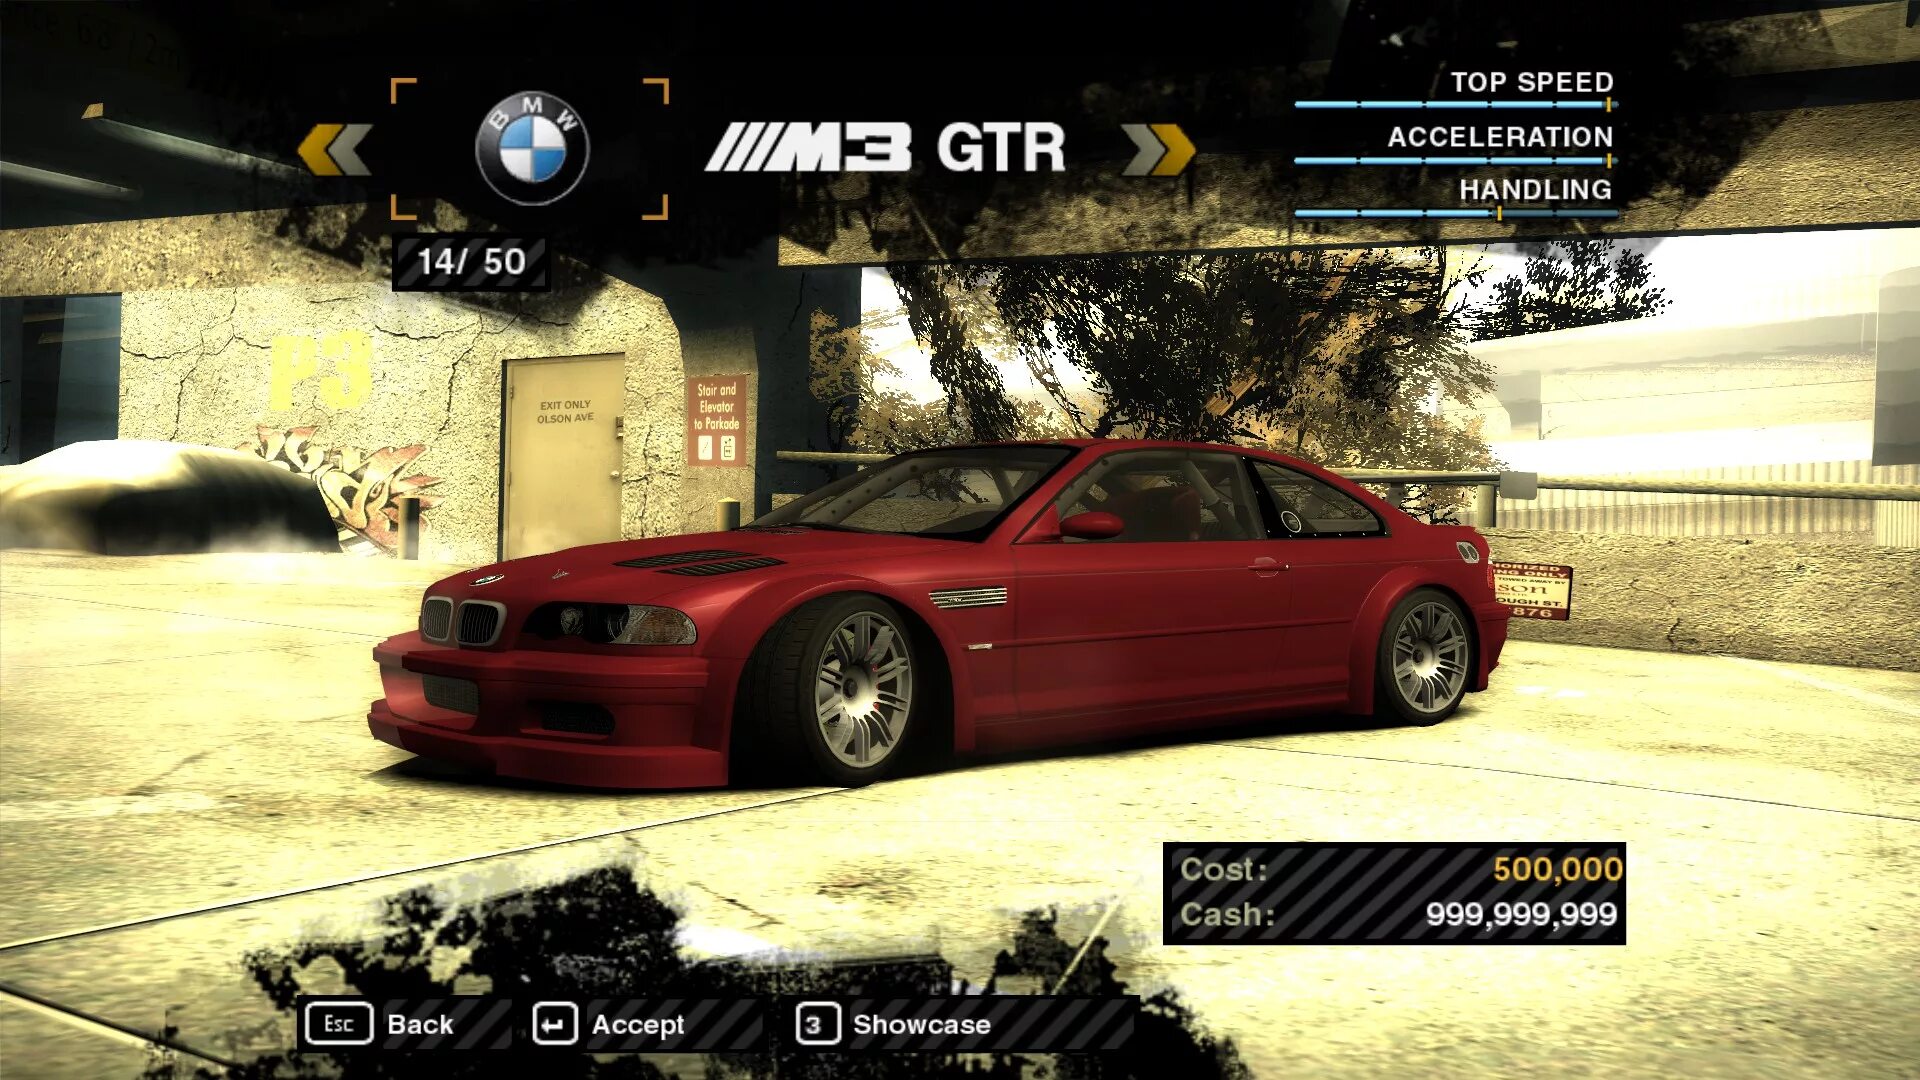 NFS most wanted 2005. Машины из мост вантед 2005. NFS most wanted 2005 машины. Нфс мост вантед машины.